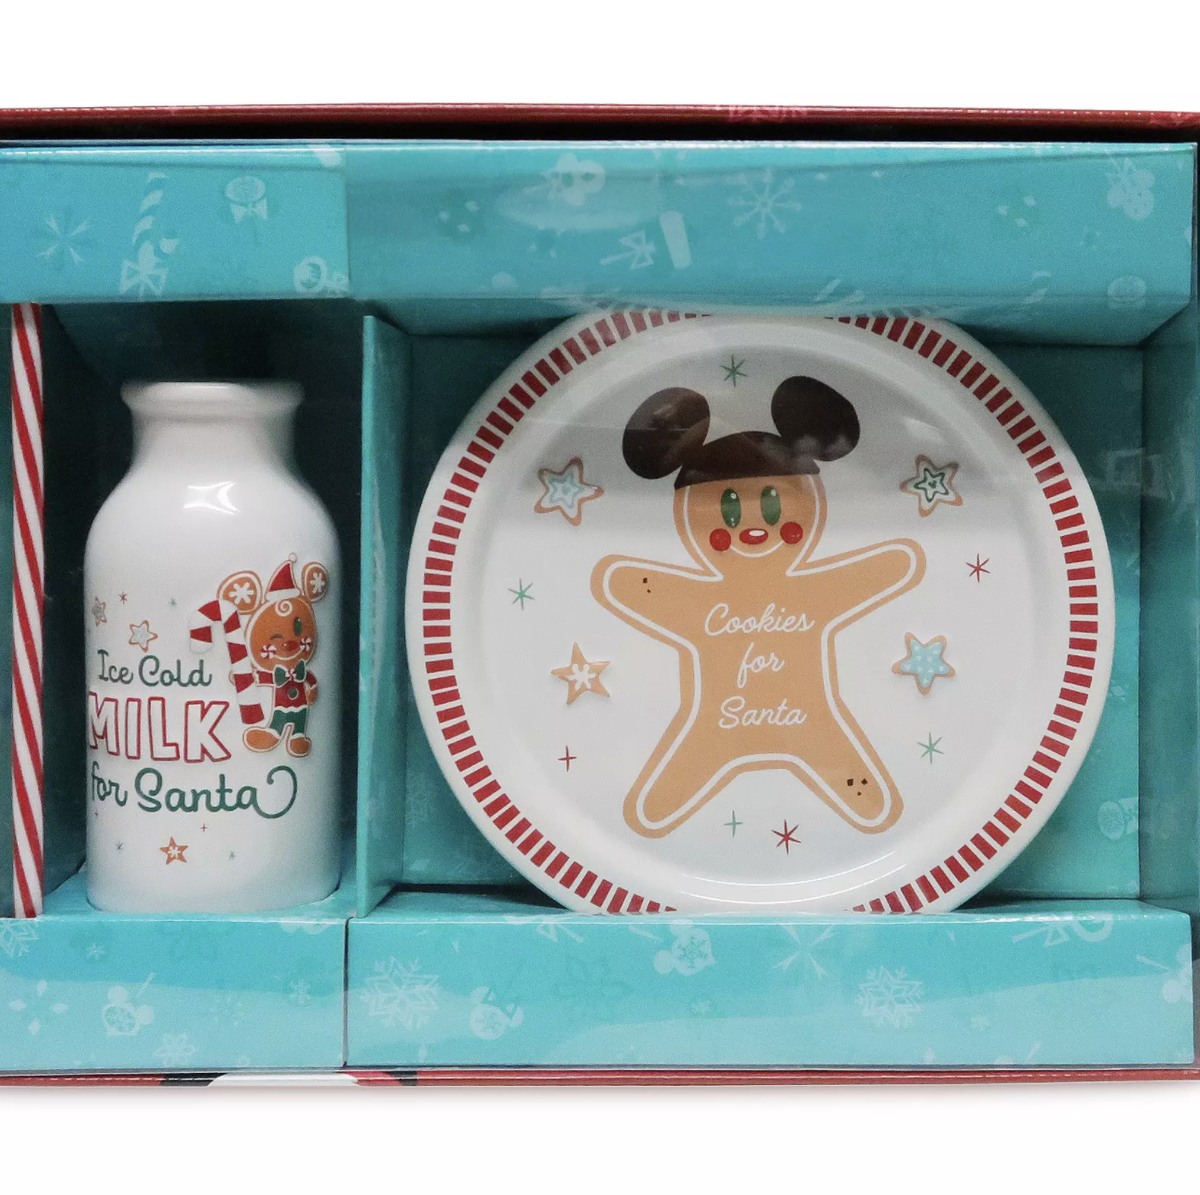 Disney Baking Set - Mickey Mouse and Friends Holiday Baking Set